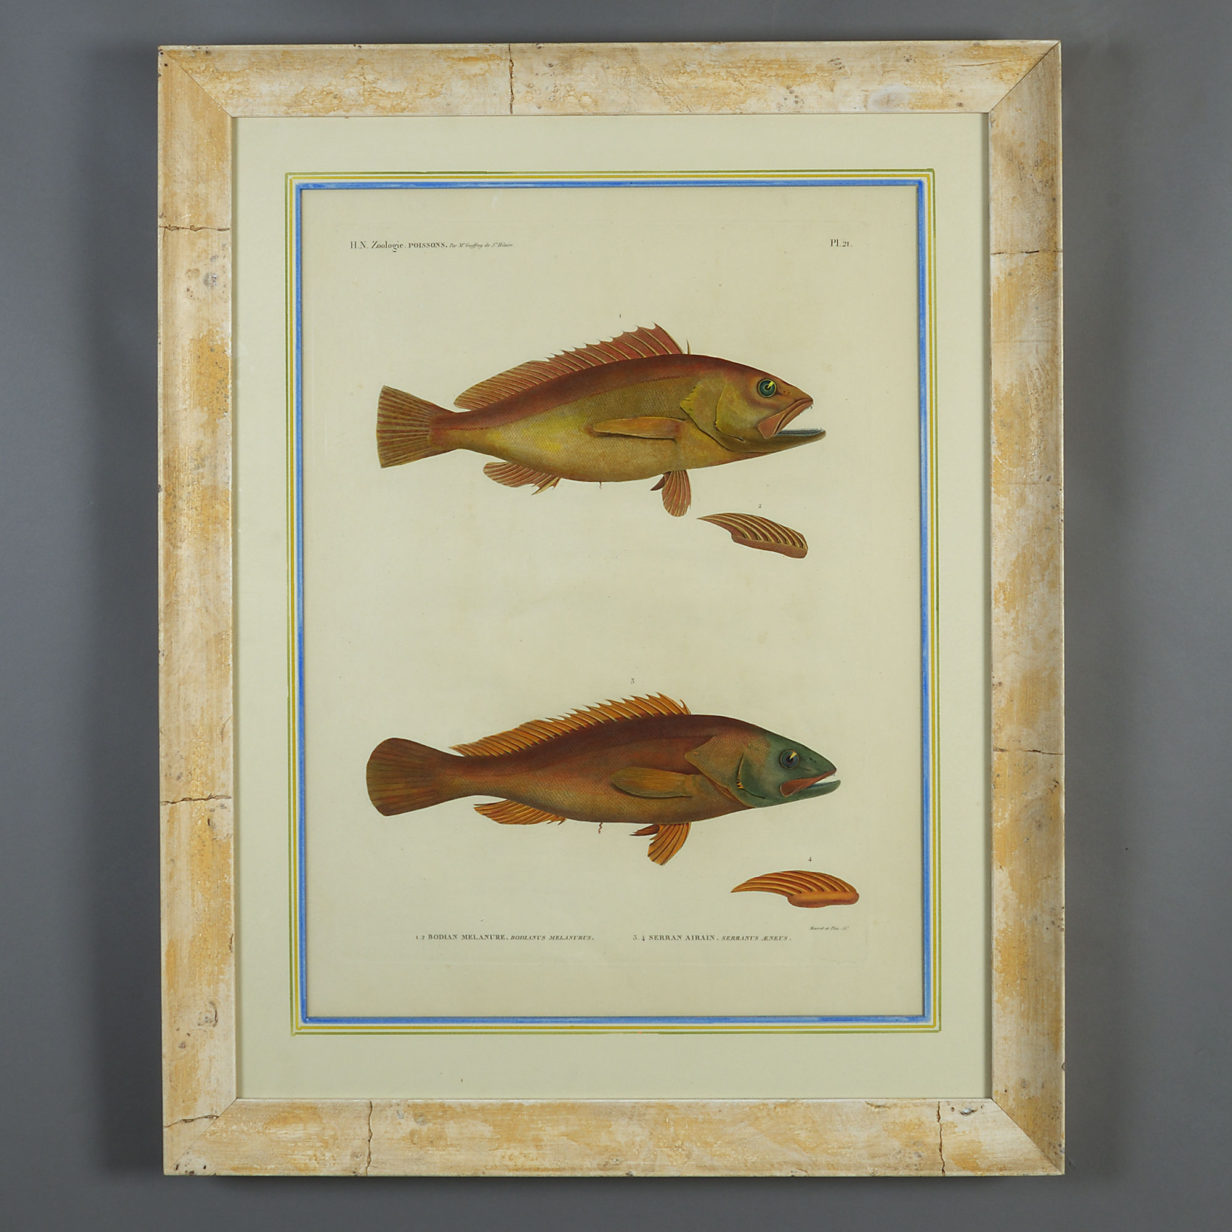 Early 19th Century Pair of Hand-Coloured Engravings of Fish from H.N. Zoologie Poissons